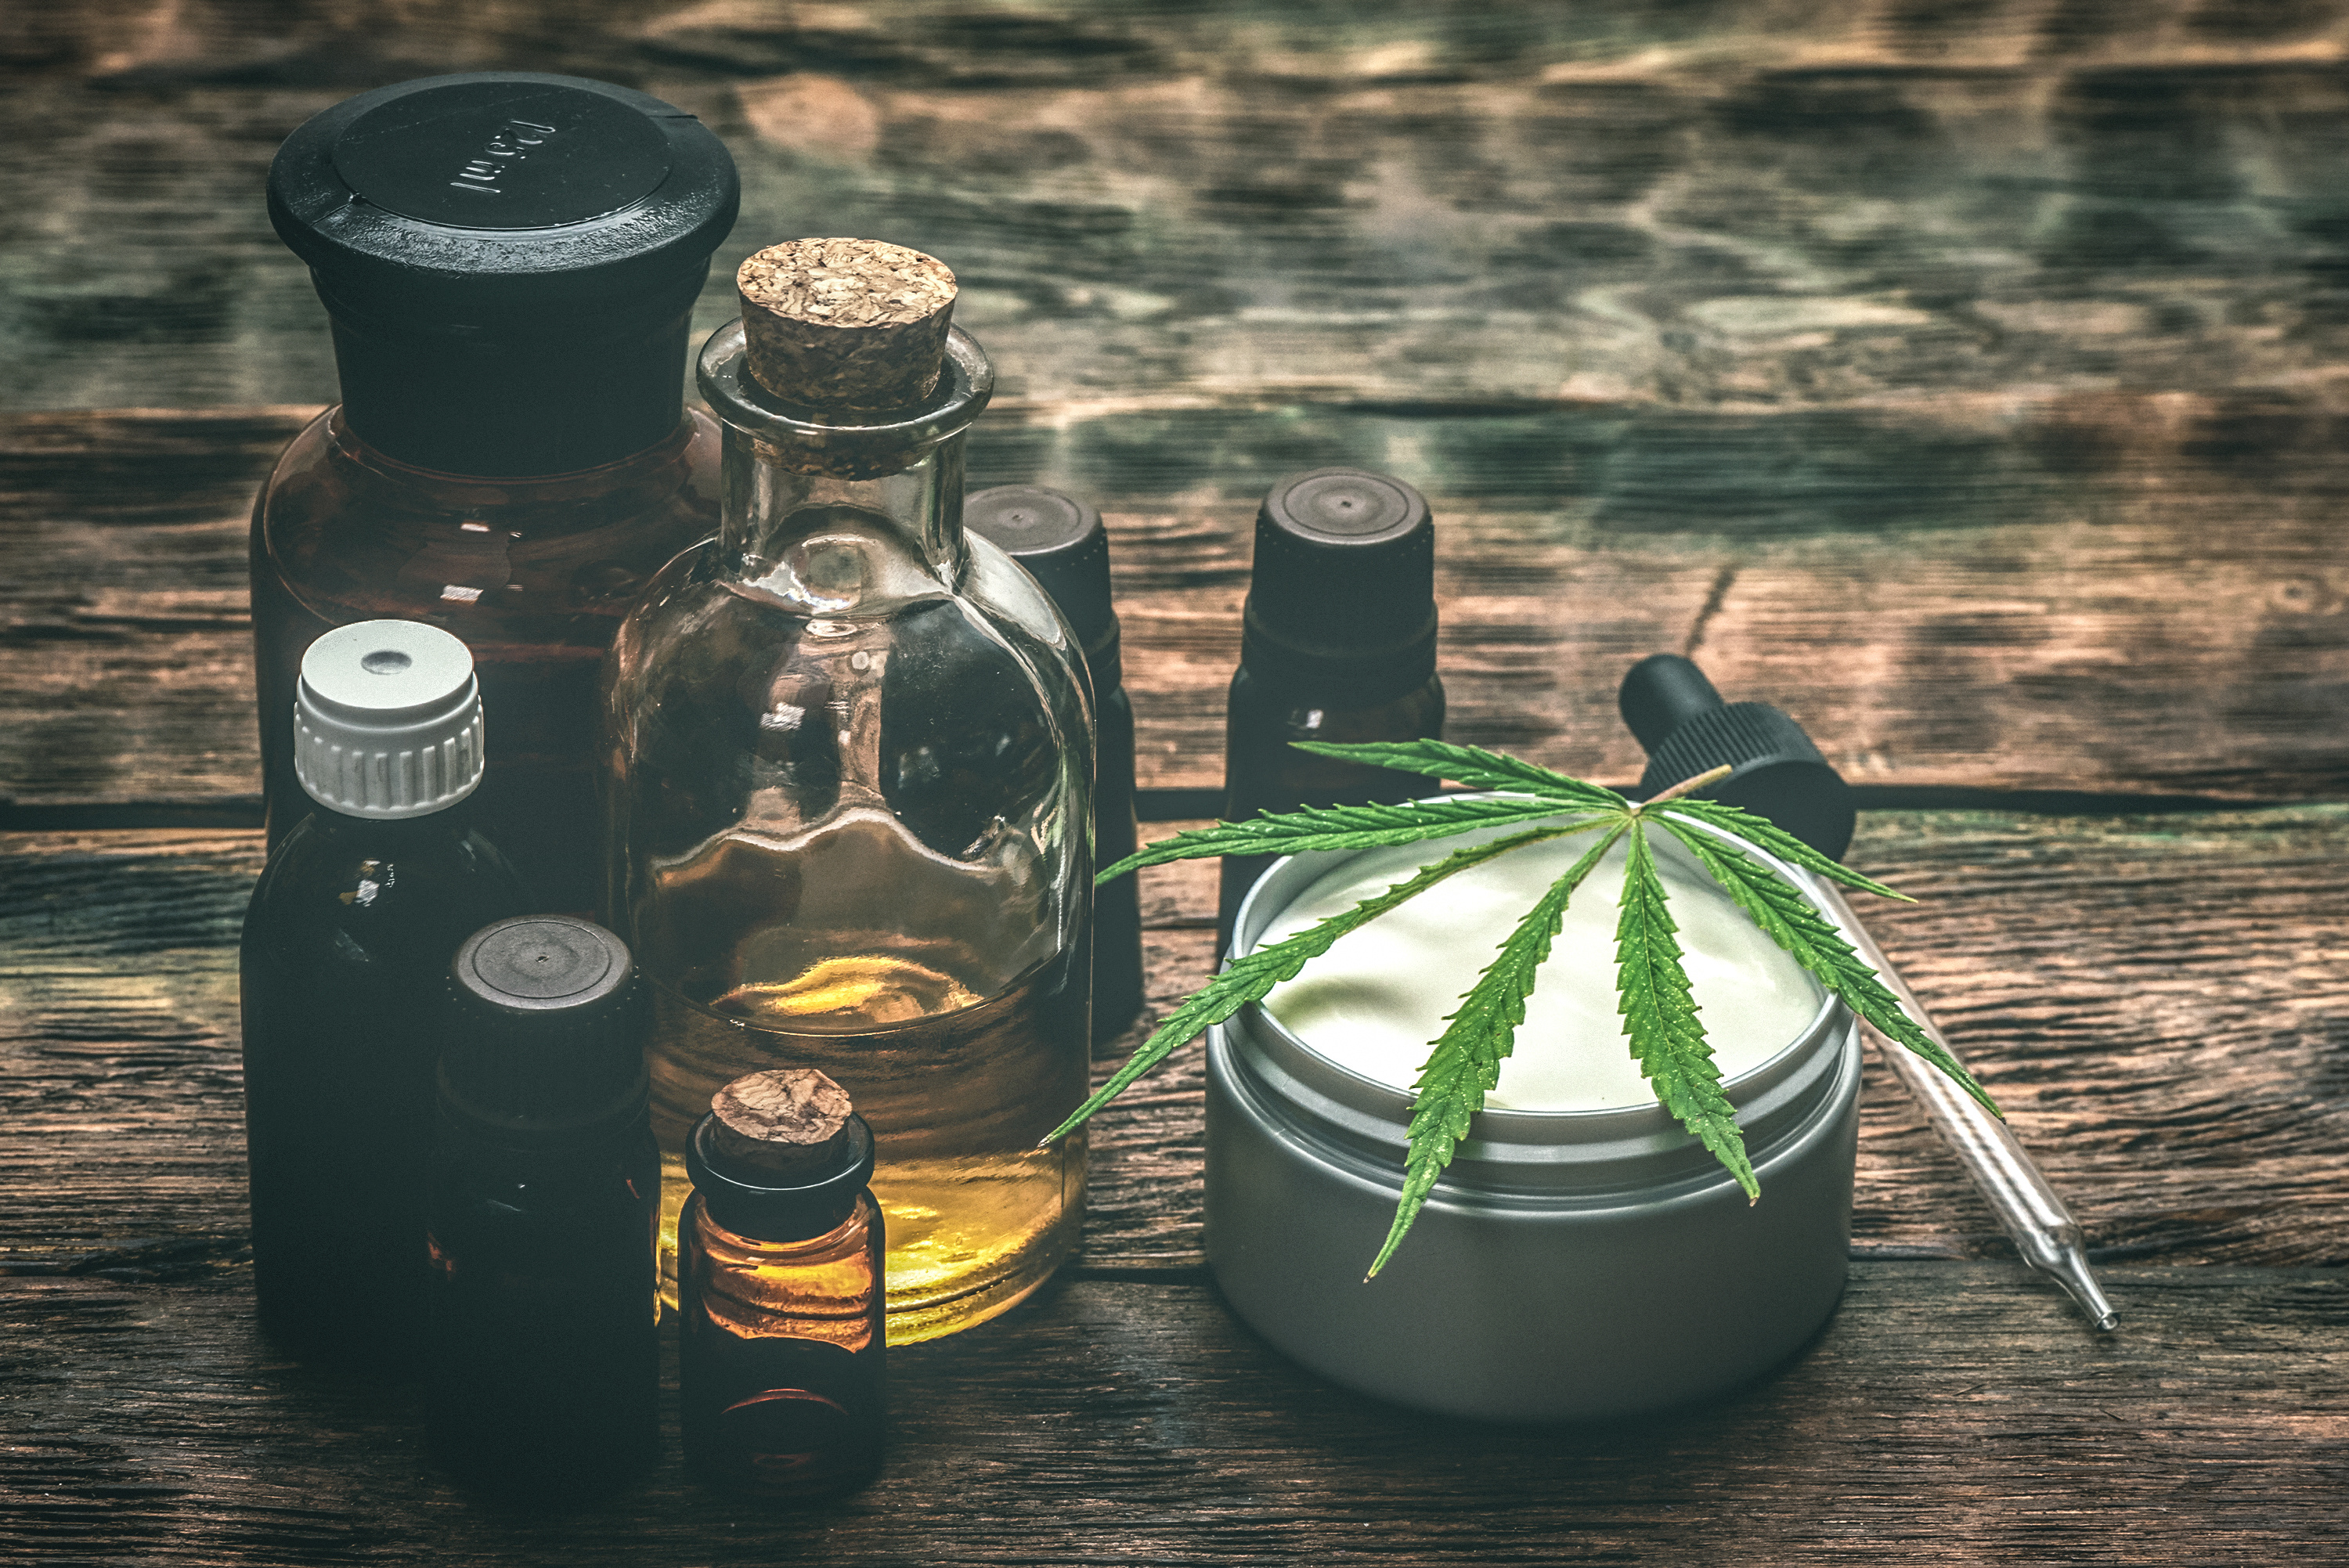 CBD products have great potential, and although not for everyone, have shown to help a lot of people so far.